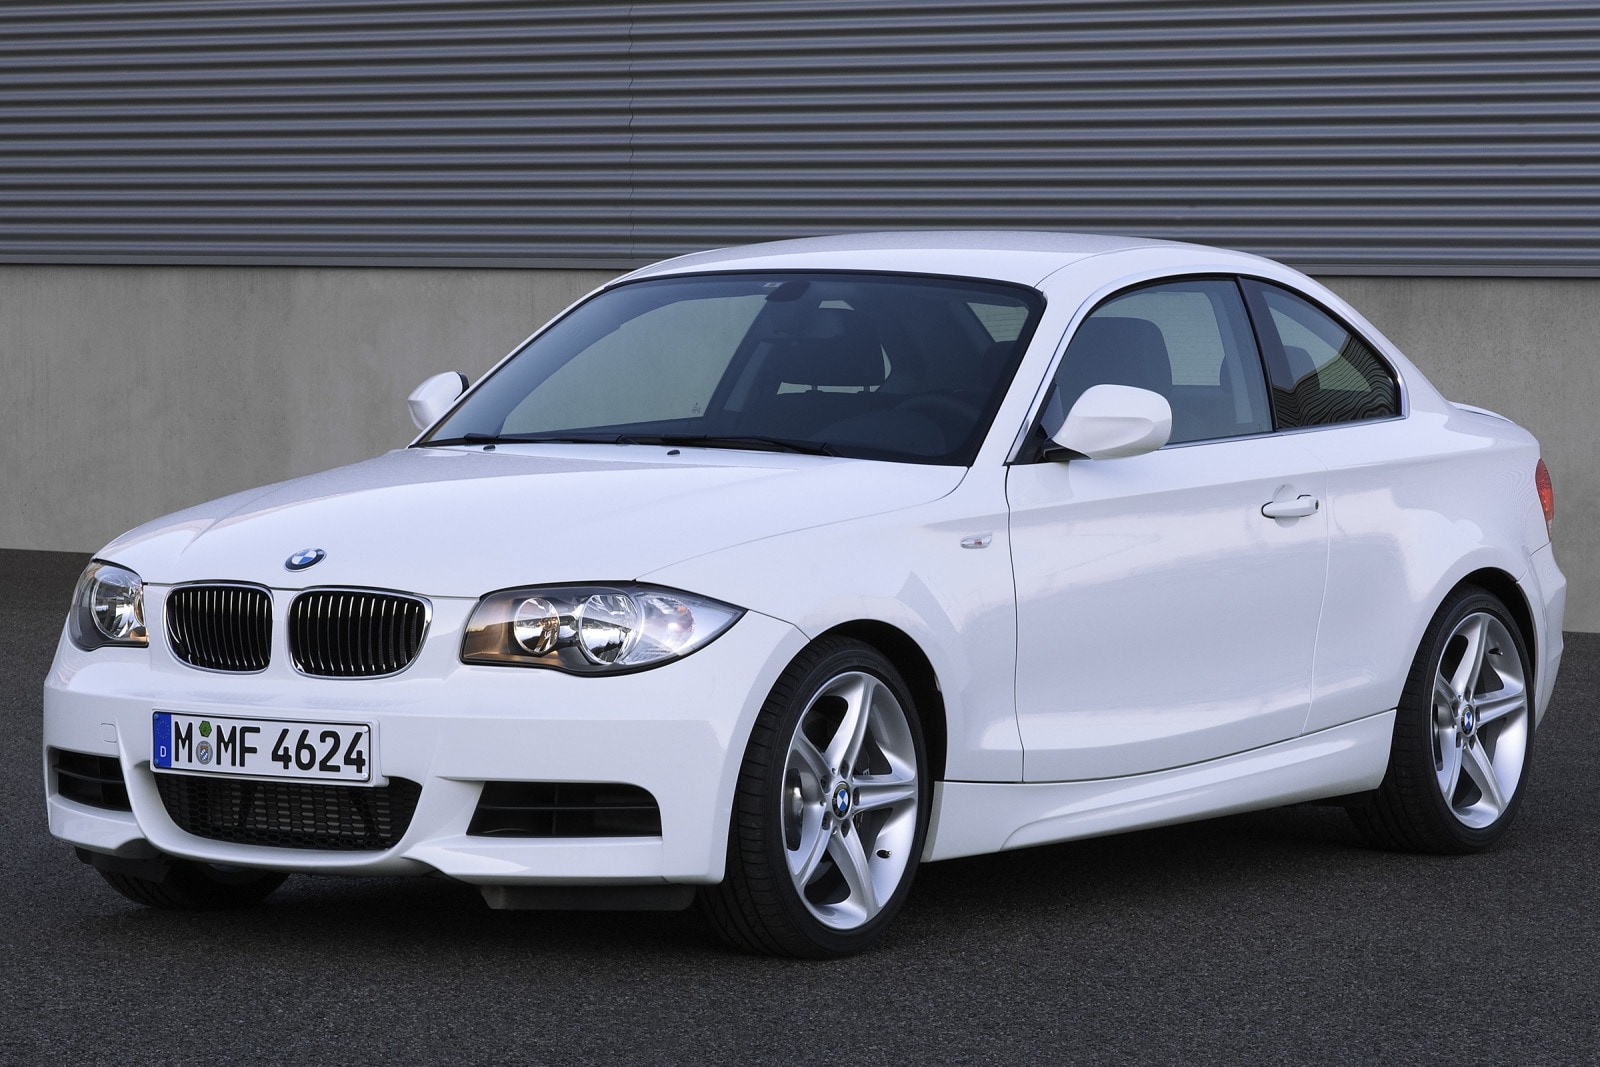 Used 2010 BMW 1 Series Coupe Review | Edmunds